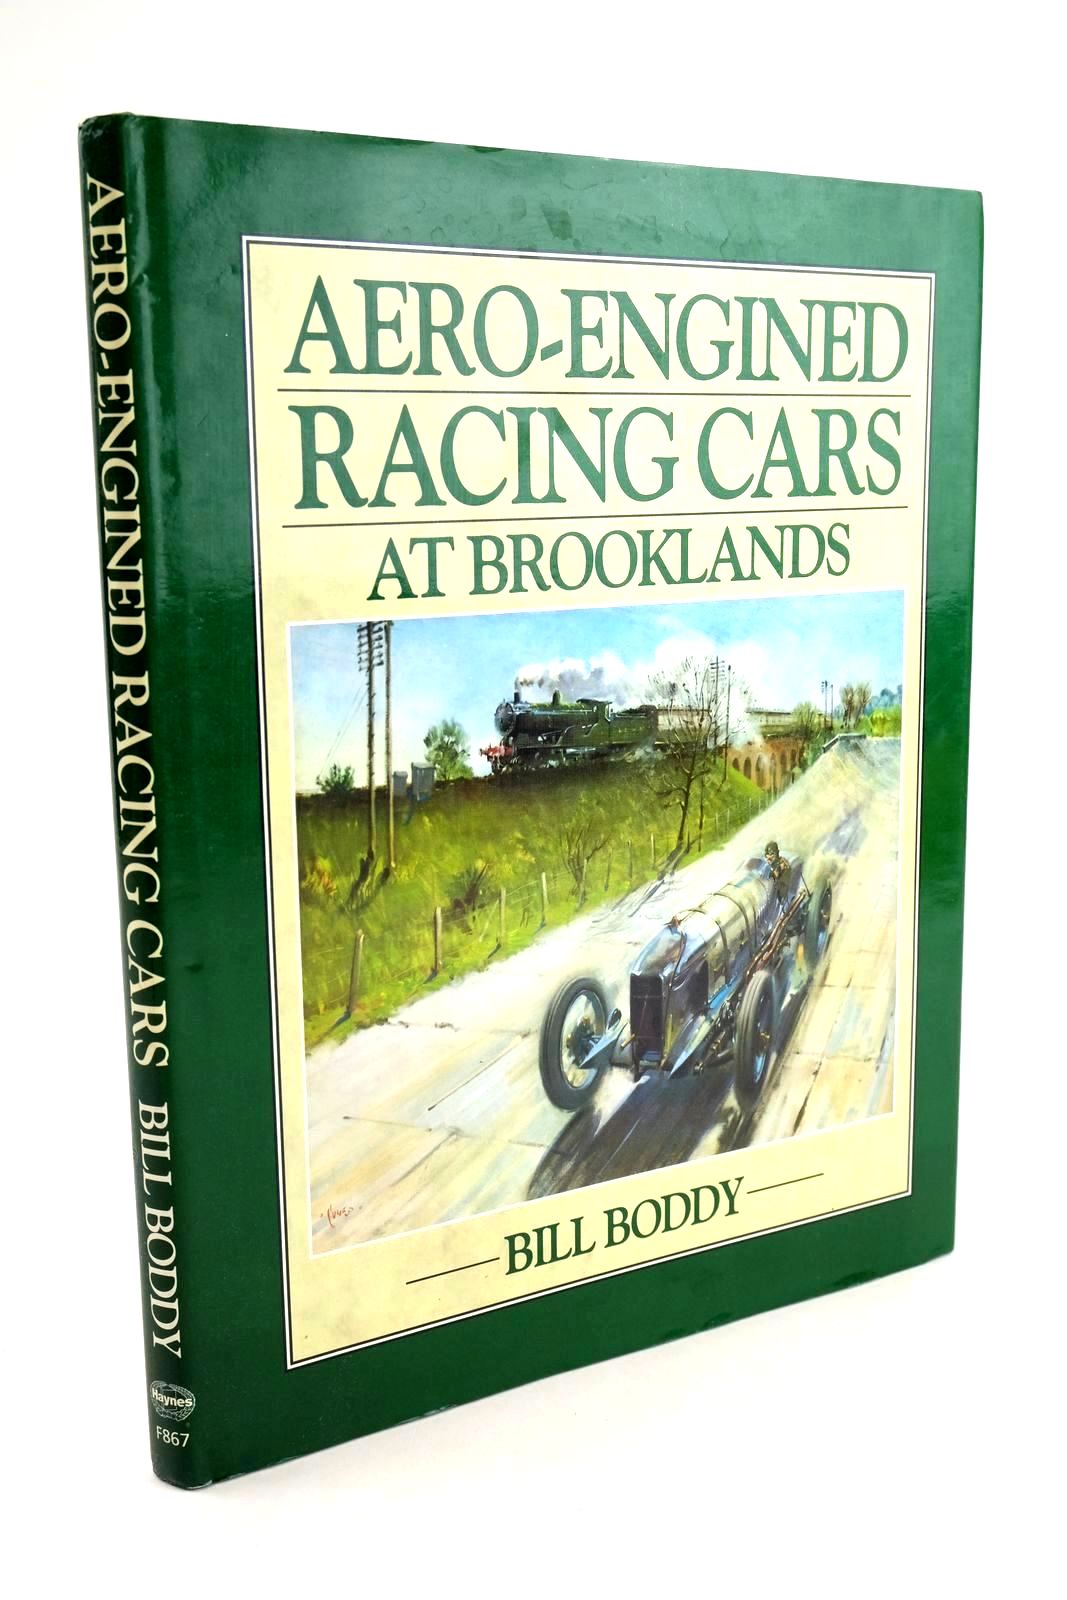 Photo of AERO-ENGINED RACING CARS AT BROOKLANDS written by Boddy, Bill published by Haynes Publishing Group (STOCK CODE: 1324047)  for sale by Stella & Rose's Books